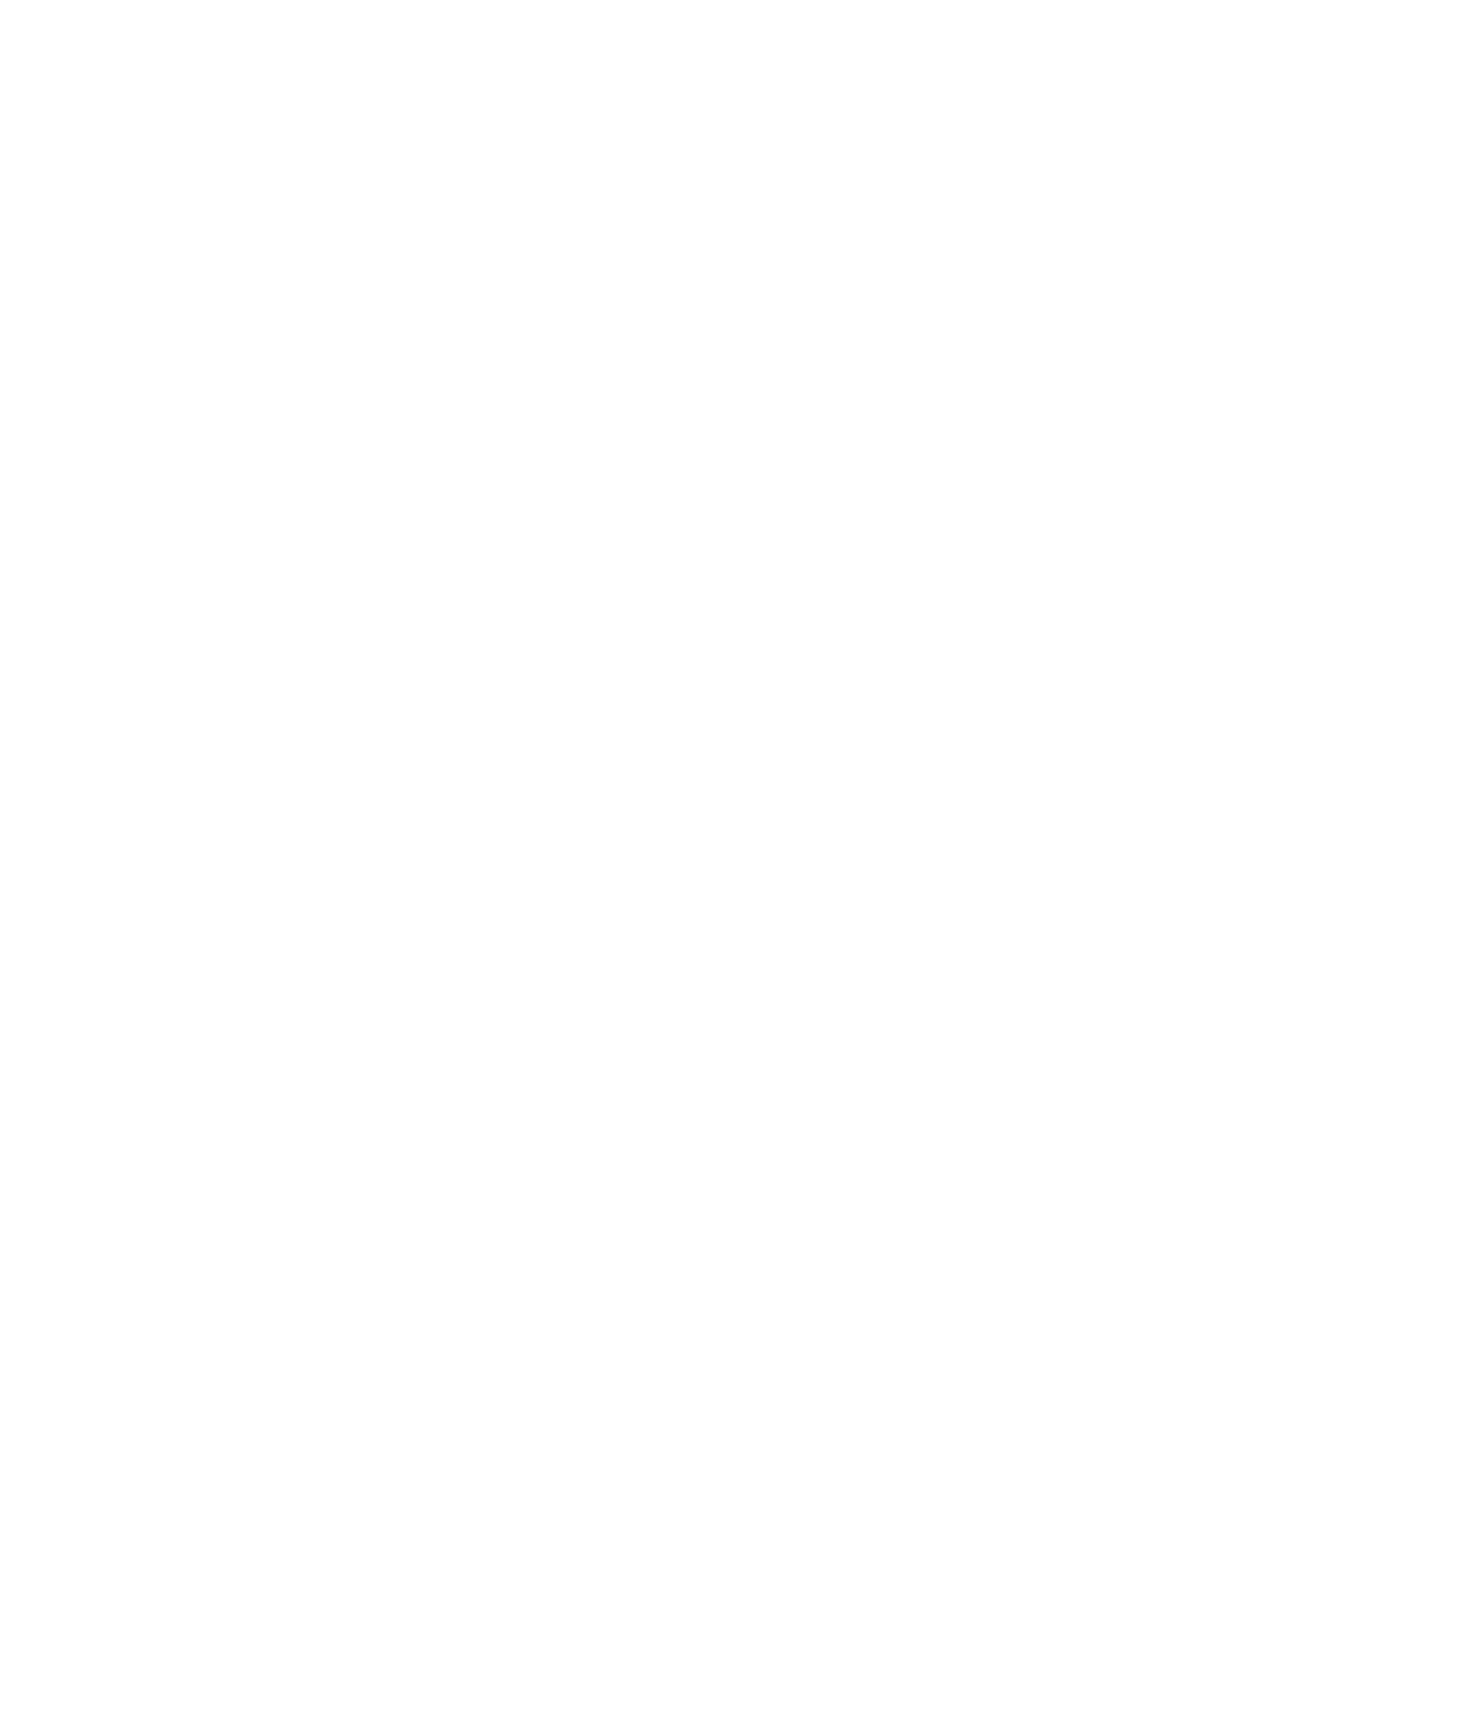 Used To Be Young